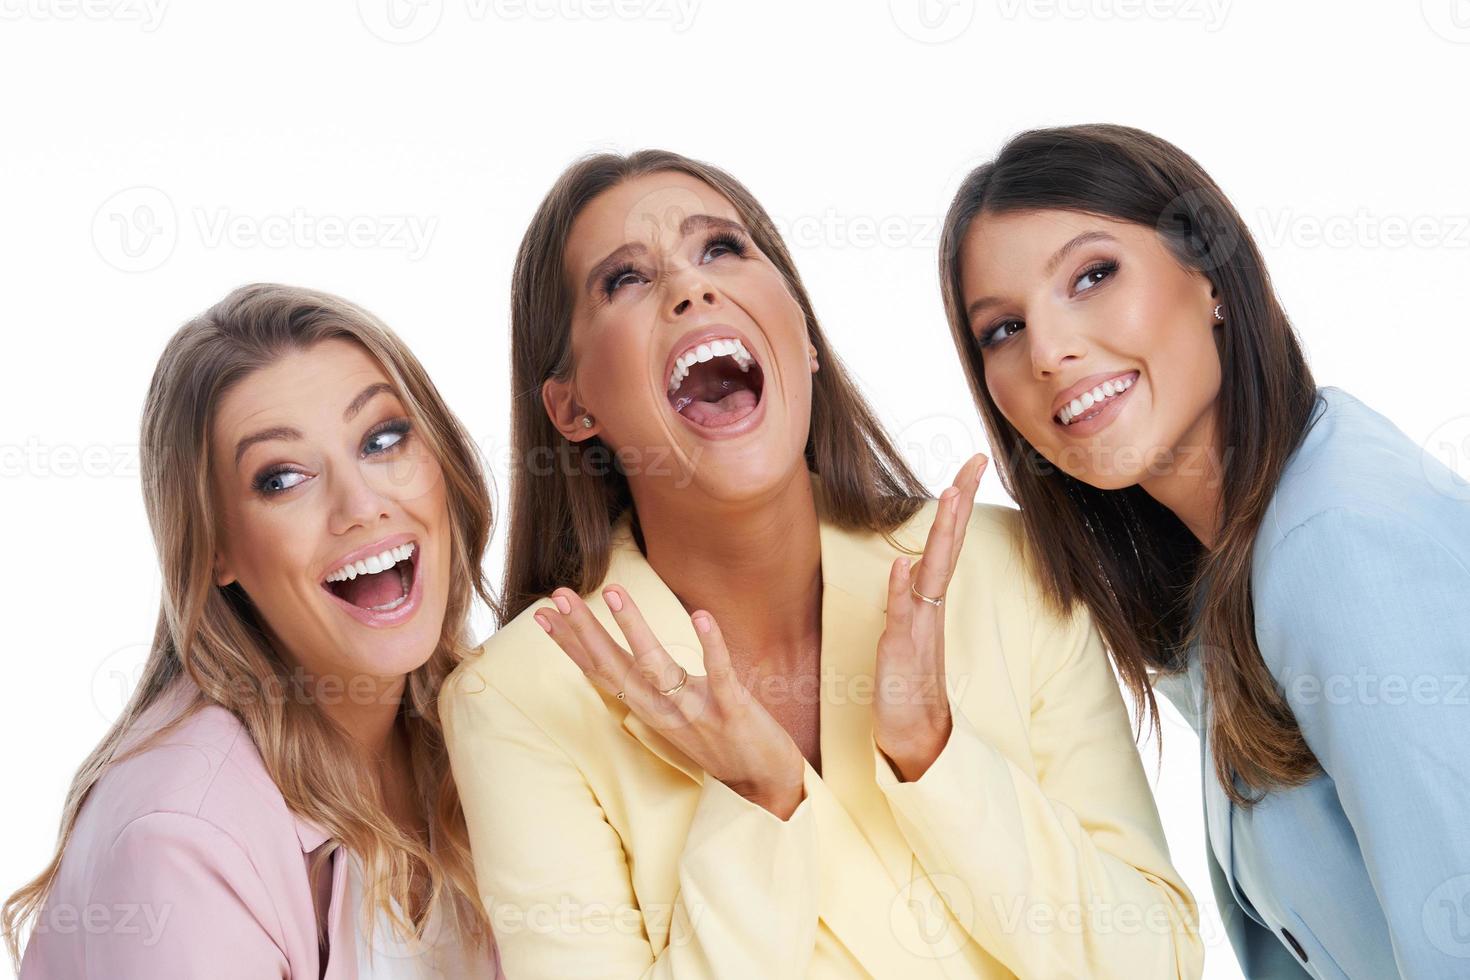 Three women in pastel suits posing over white background photo